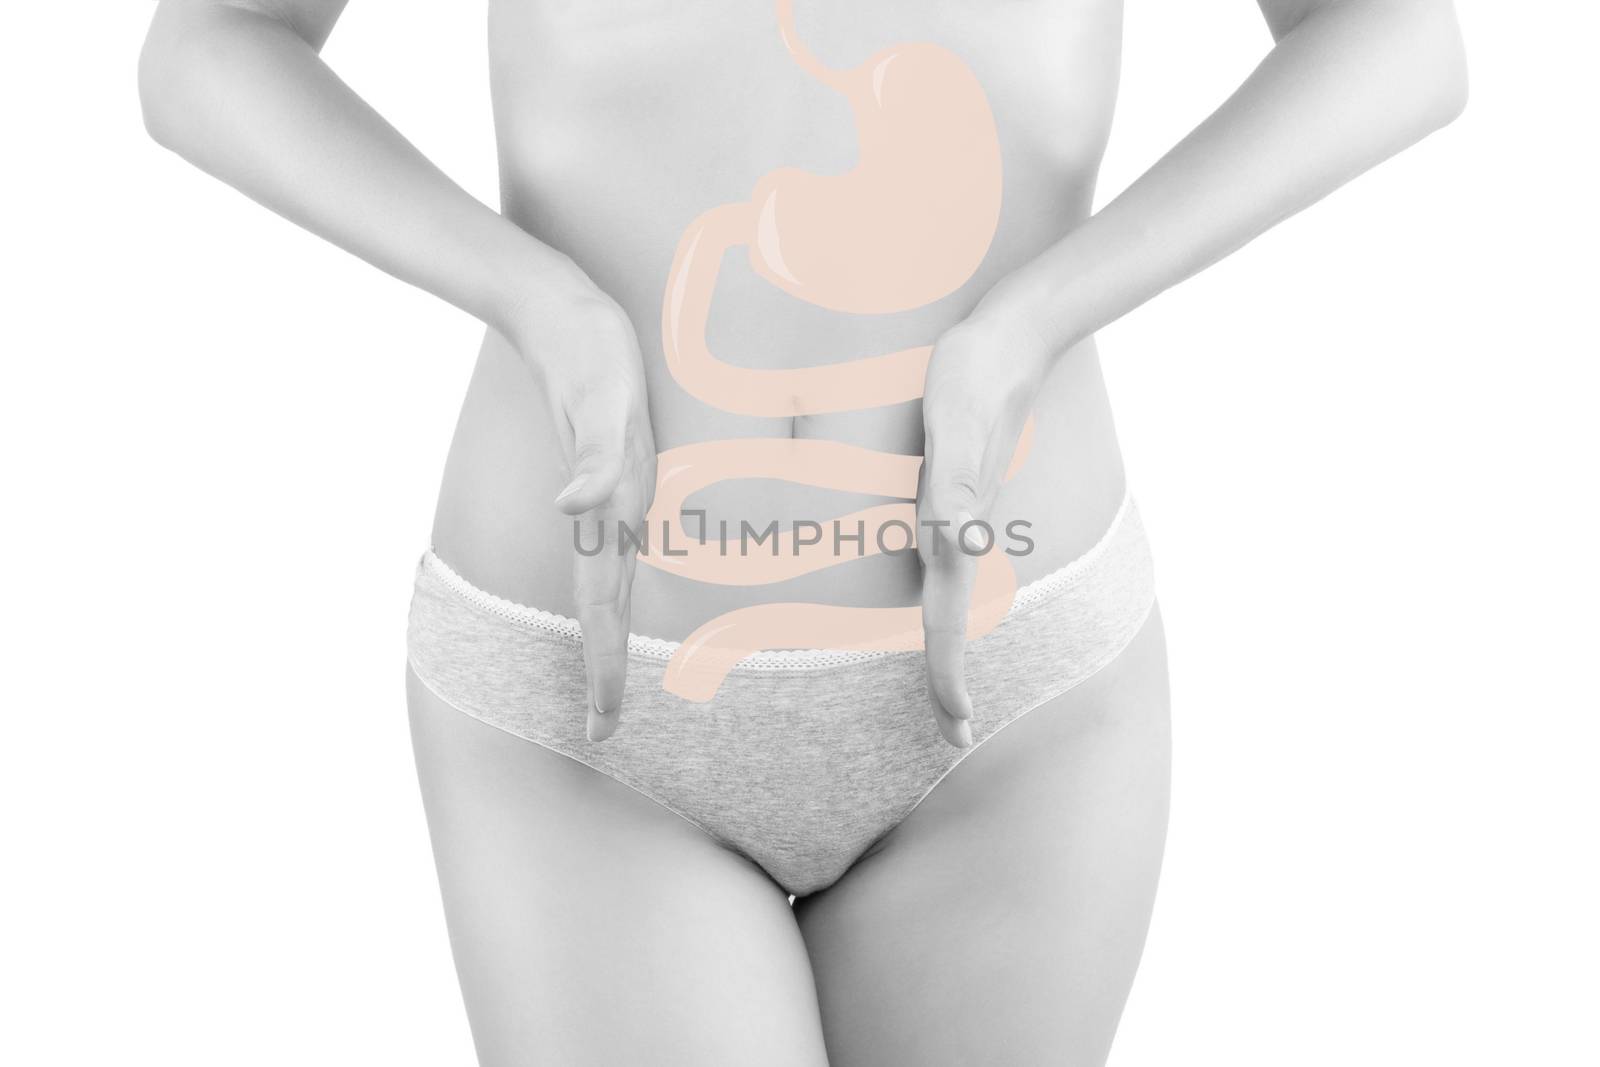 Beautiful woman touching her stomach isolated on white background with digestive organs illustration. Healthy eating, digestive problems.